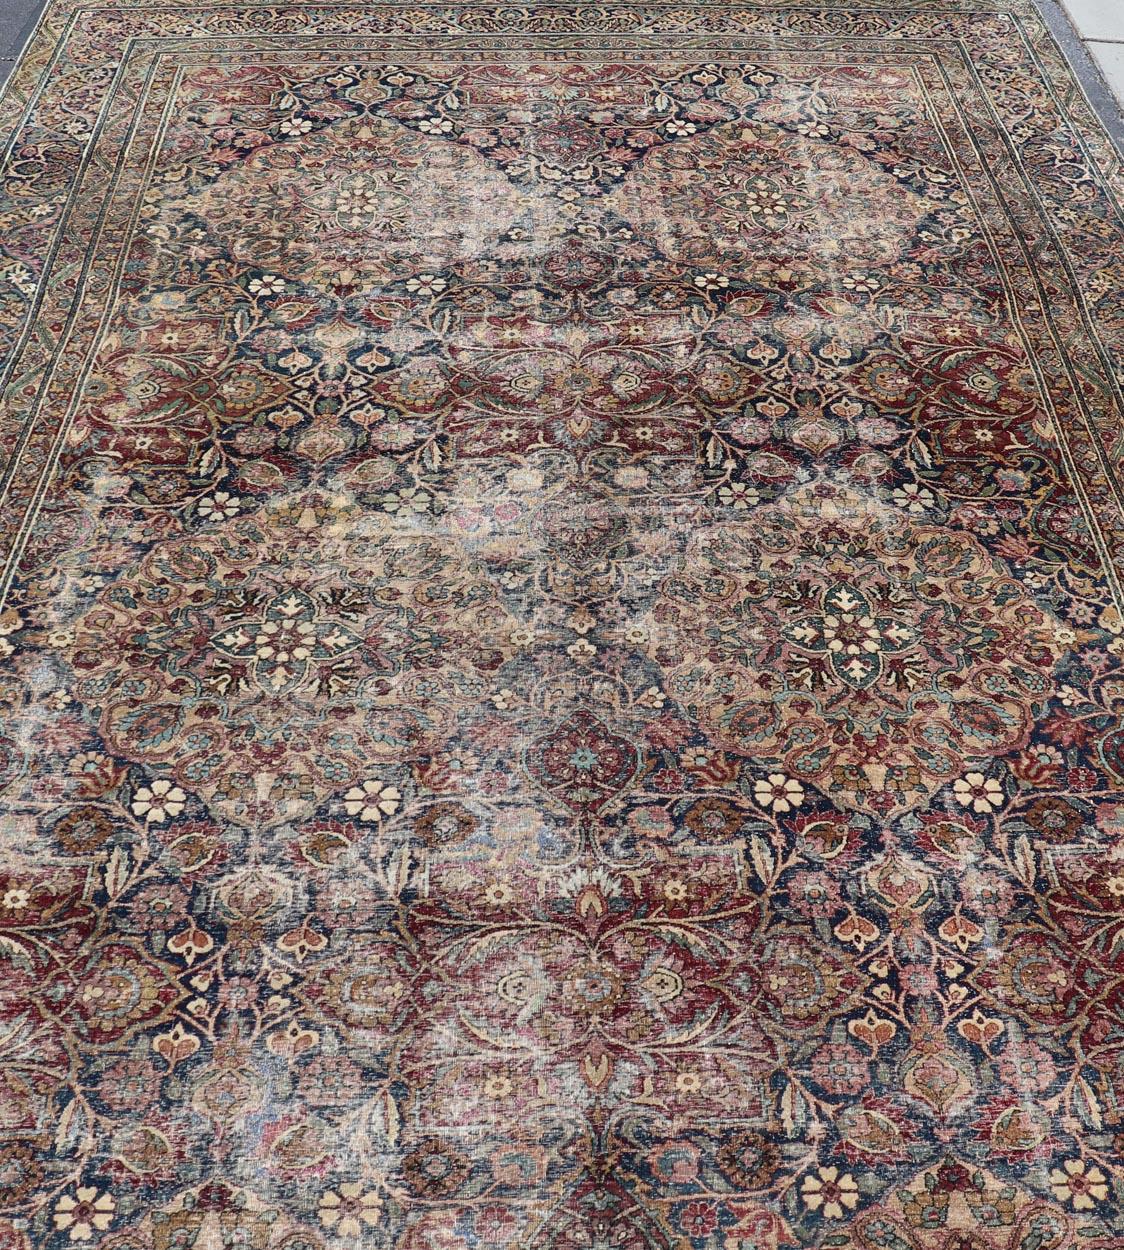 Kirman Antique Persian Lavar Kerman Large Gallery Rug with All-Over Floral Design For Sale